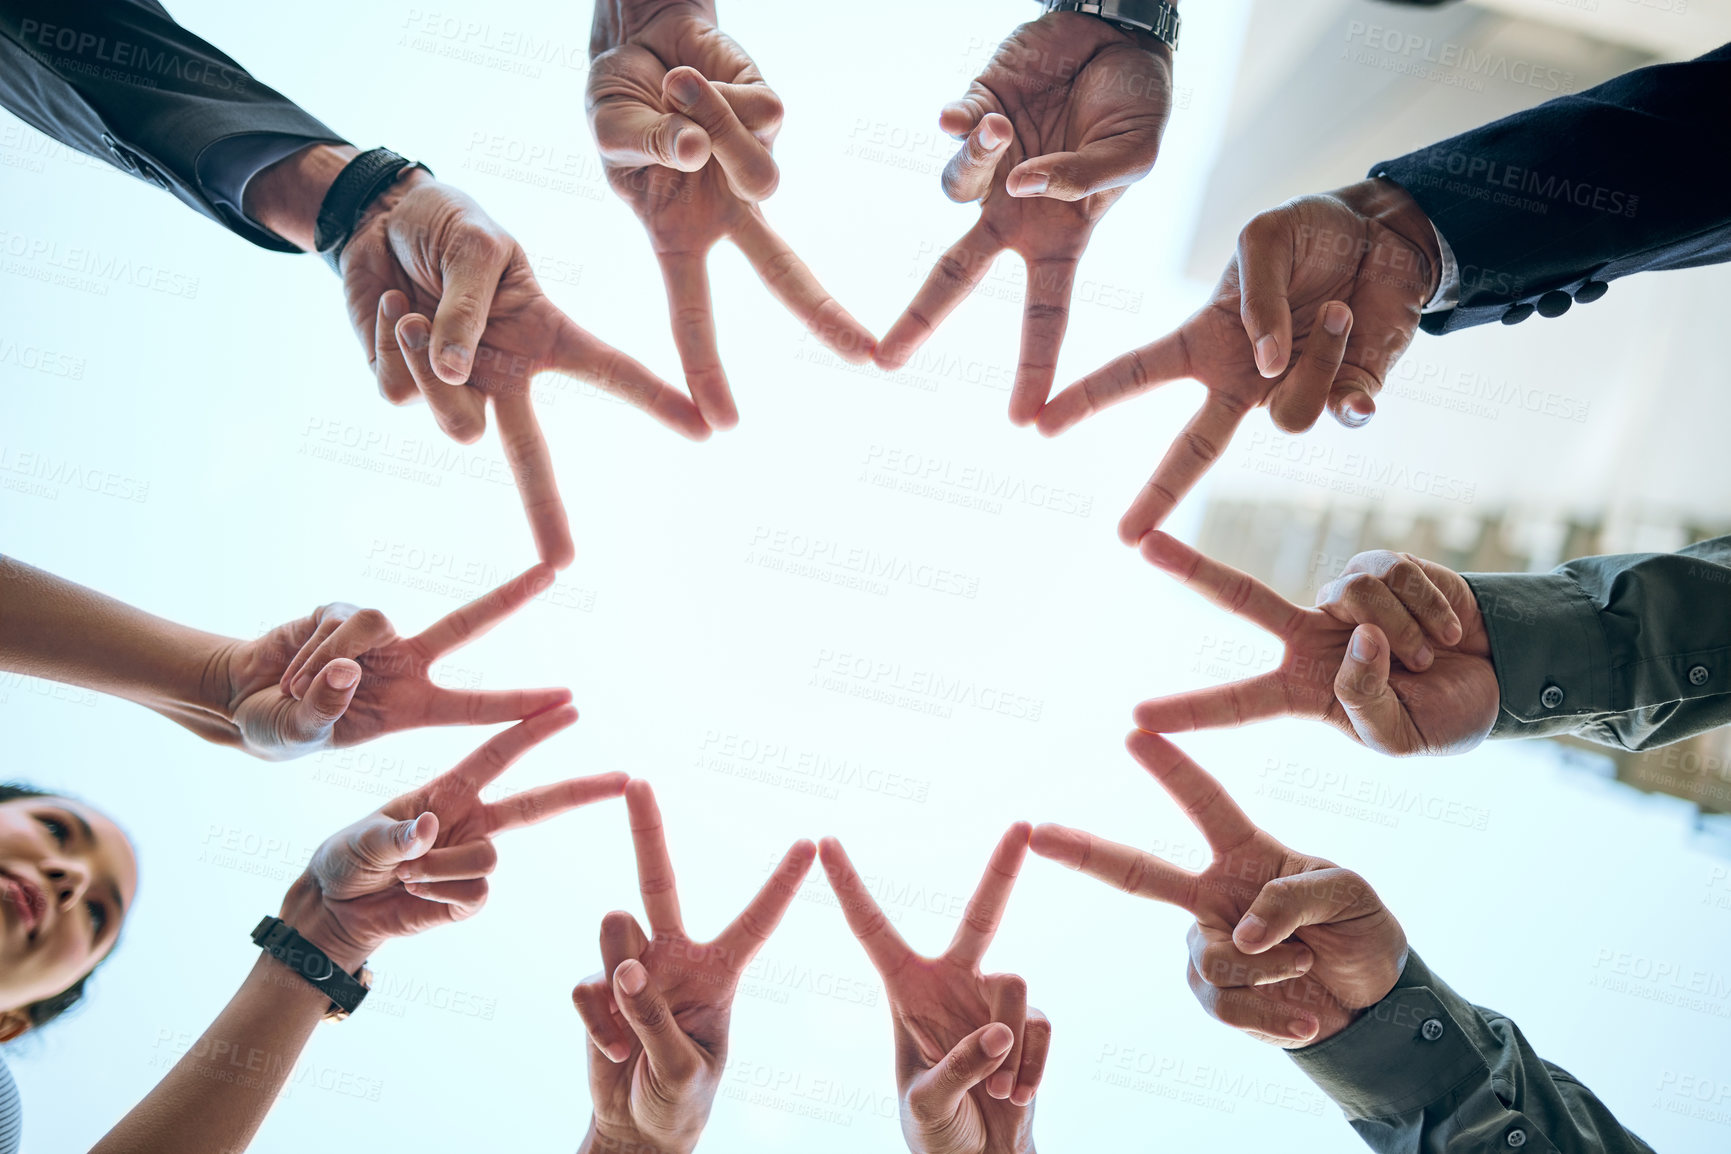 Buy stock photo Star, teamwork or hands of business people for support or peace with diversity or community collaboration. Blue sky, low angle or group with solidarity, trust or hand gesture sign together outdoors